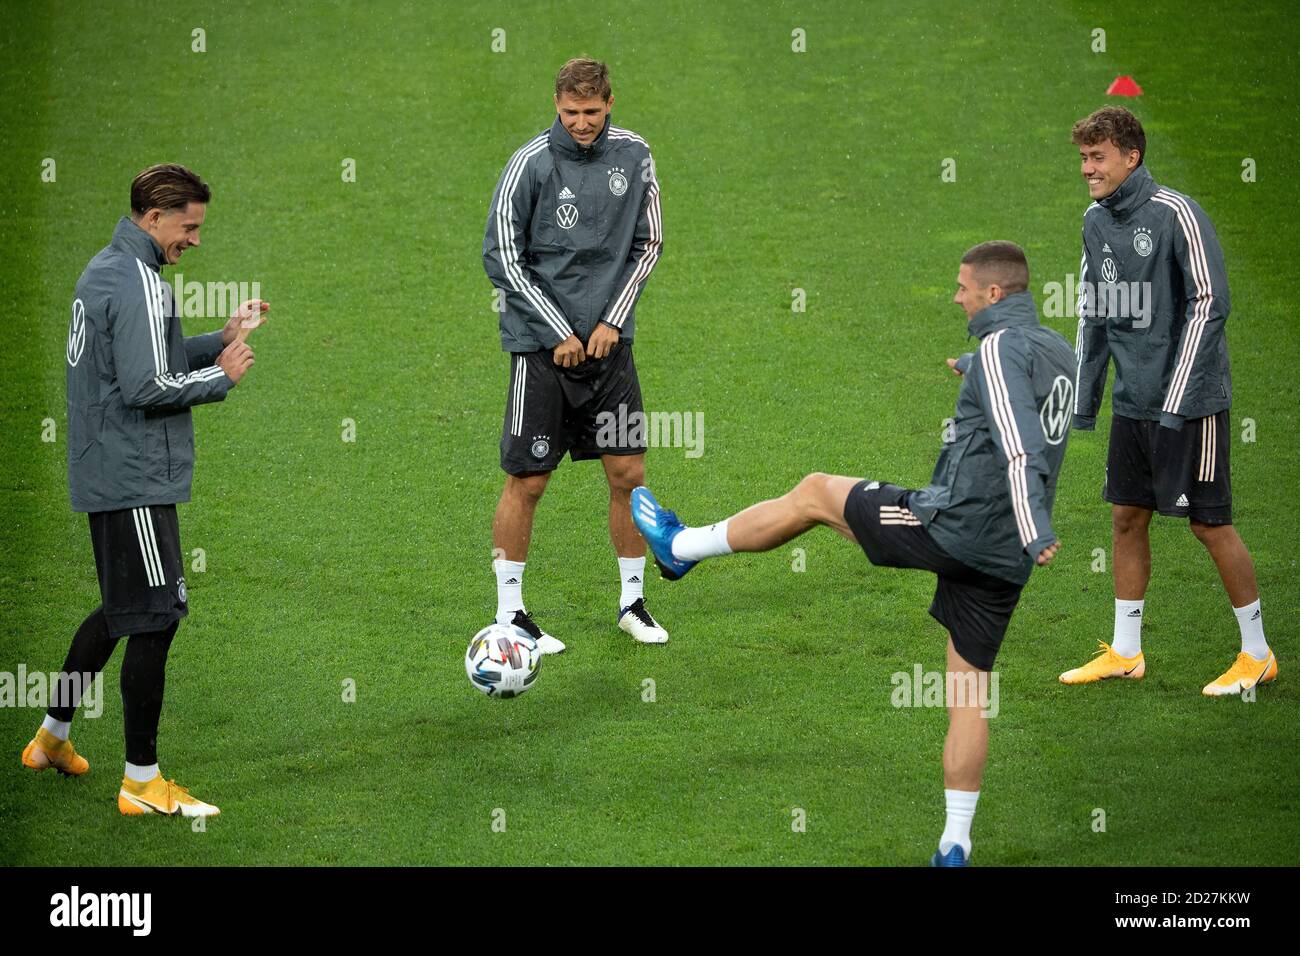 06 October 2020, North Rhine-Westphalia, Cologne: Football: national team, the day before the international test match against Turkey. Robin Koch (l-r), Niklas Stark, Robin Gosens and Luca Waldschmidt in action during the training of the national team in the RheinEnergie - Stadium. Photo: Federico Gambarini/dpa - IMPORTANT NOTE: In accordance with the regulations of the DFL Deutsche Fußball Liga and the DFB Deutscher Fußball-Bund, it is prohibited to exploit or have exploited in the stadium and/or from the game taken photographs in the form of sequence images and/or video-like photo series. Stock Photo